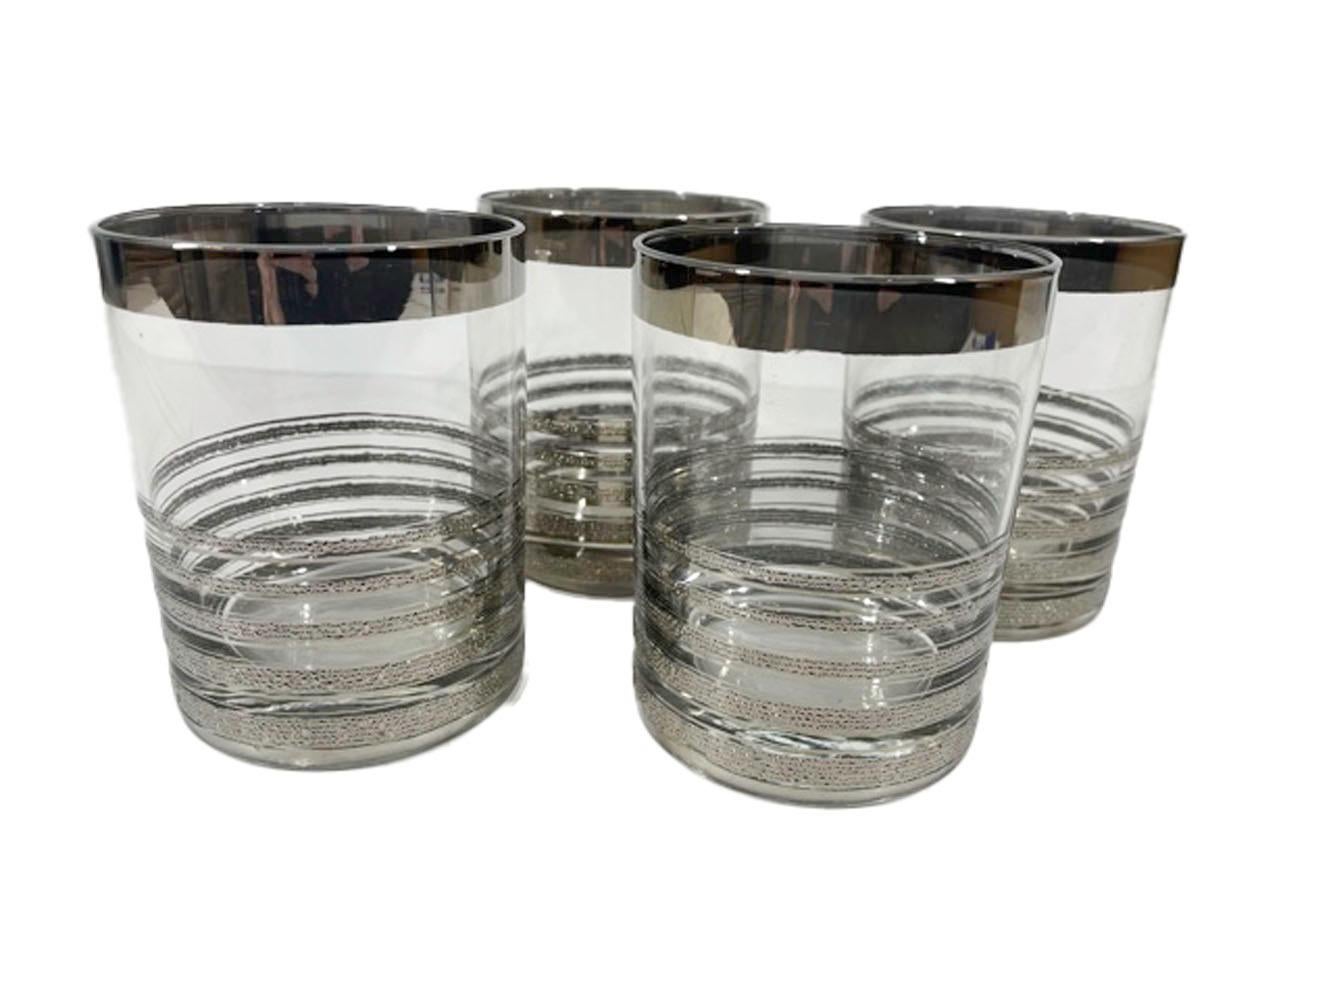 Set of 4 Mid-Century Modern rocks glasses having a smooth silver band at the rim and 5 graduated, textured silver bands on the lower half.